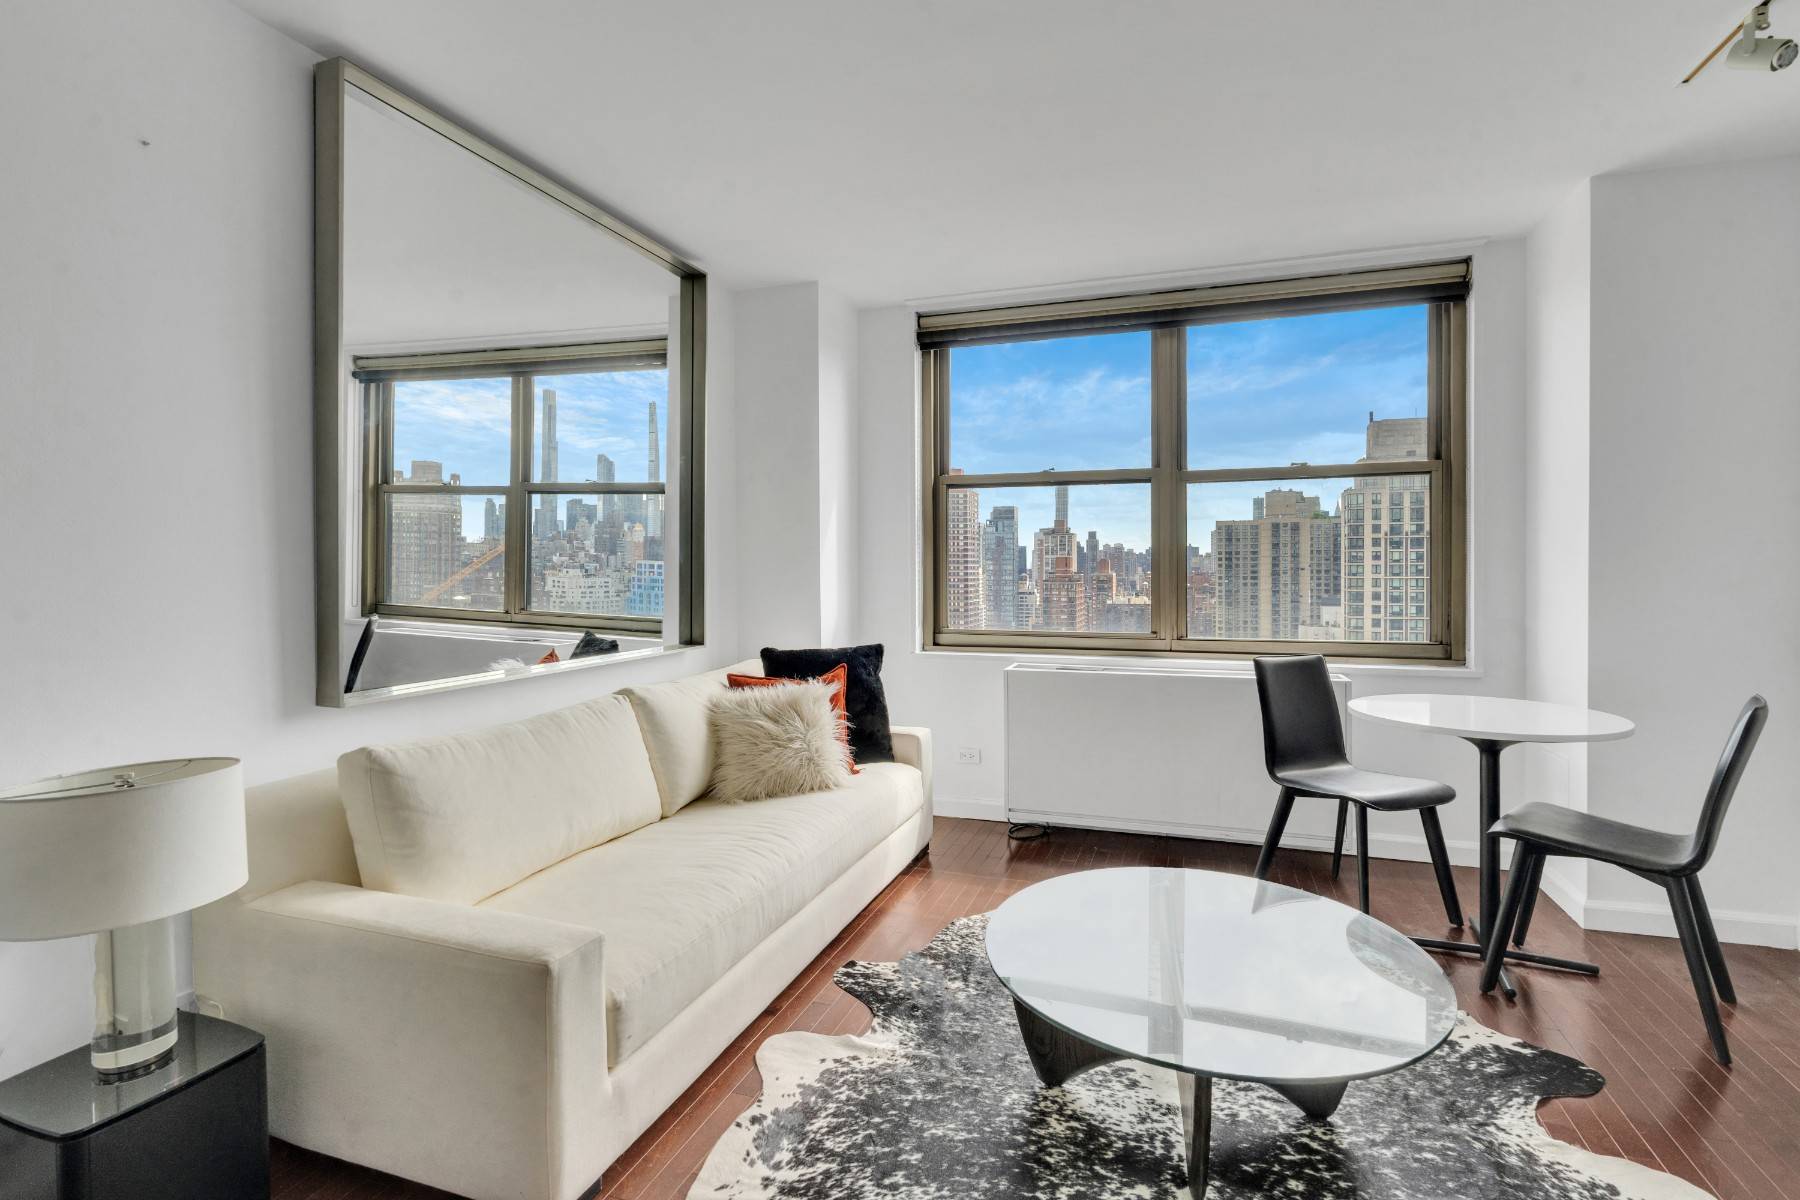 Imagine waking up to breathtaking views of the Manhattan skyline from the 28th floor of Continental Towers, the Upper East Side's most coveted condominium.